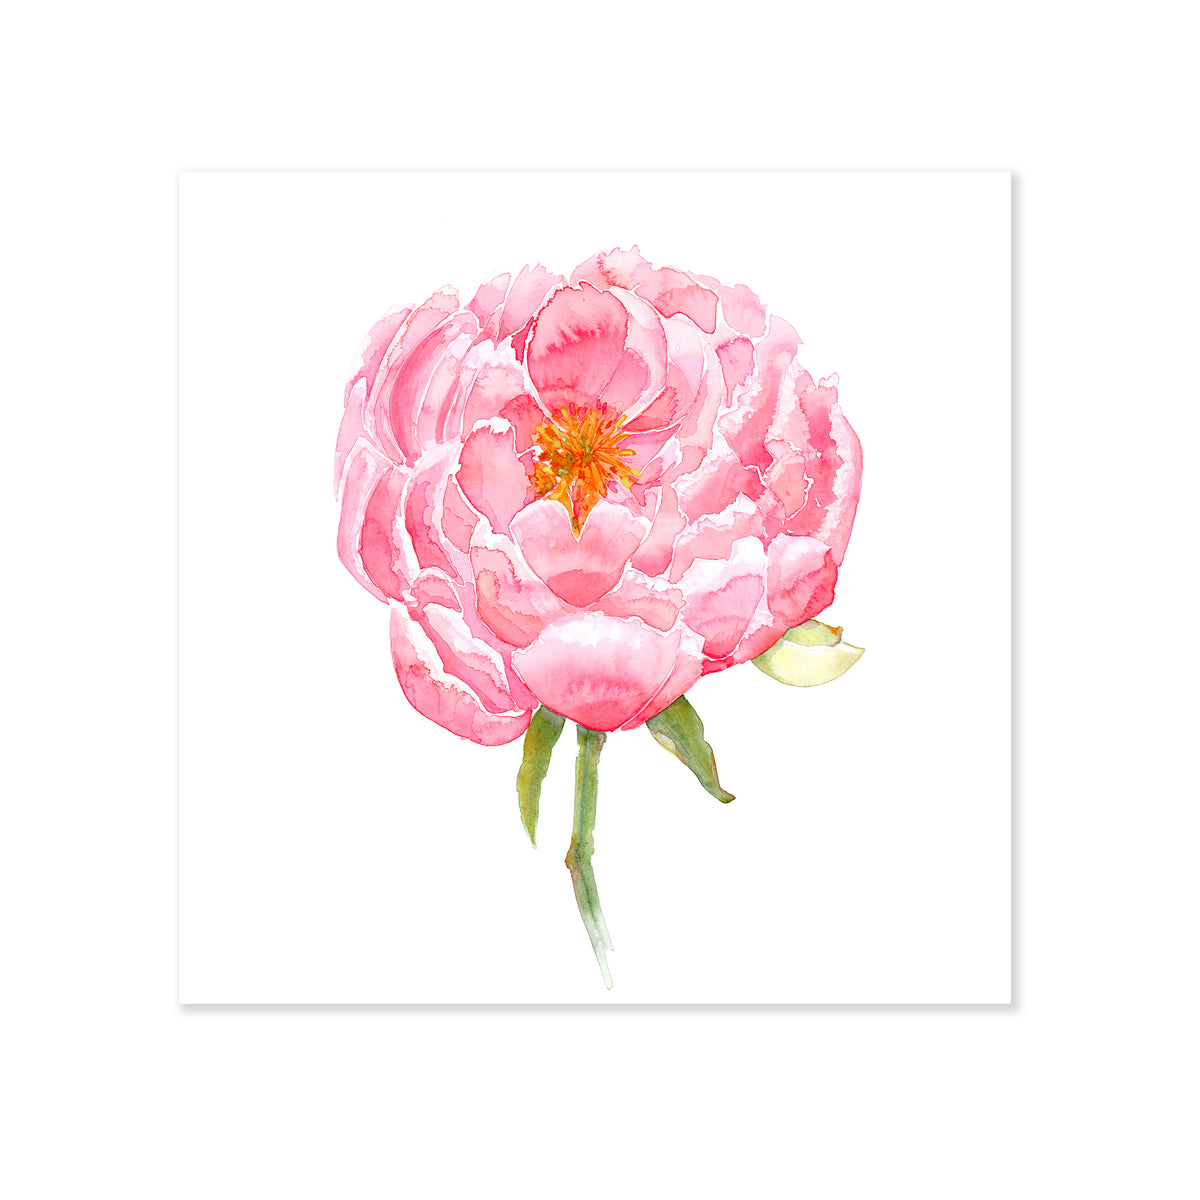 A fine art print illustrating a blooming pink peony painted using watercolors on a soft white background